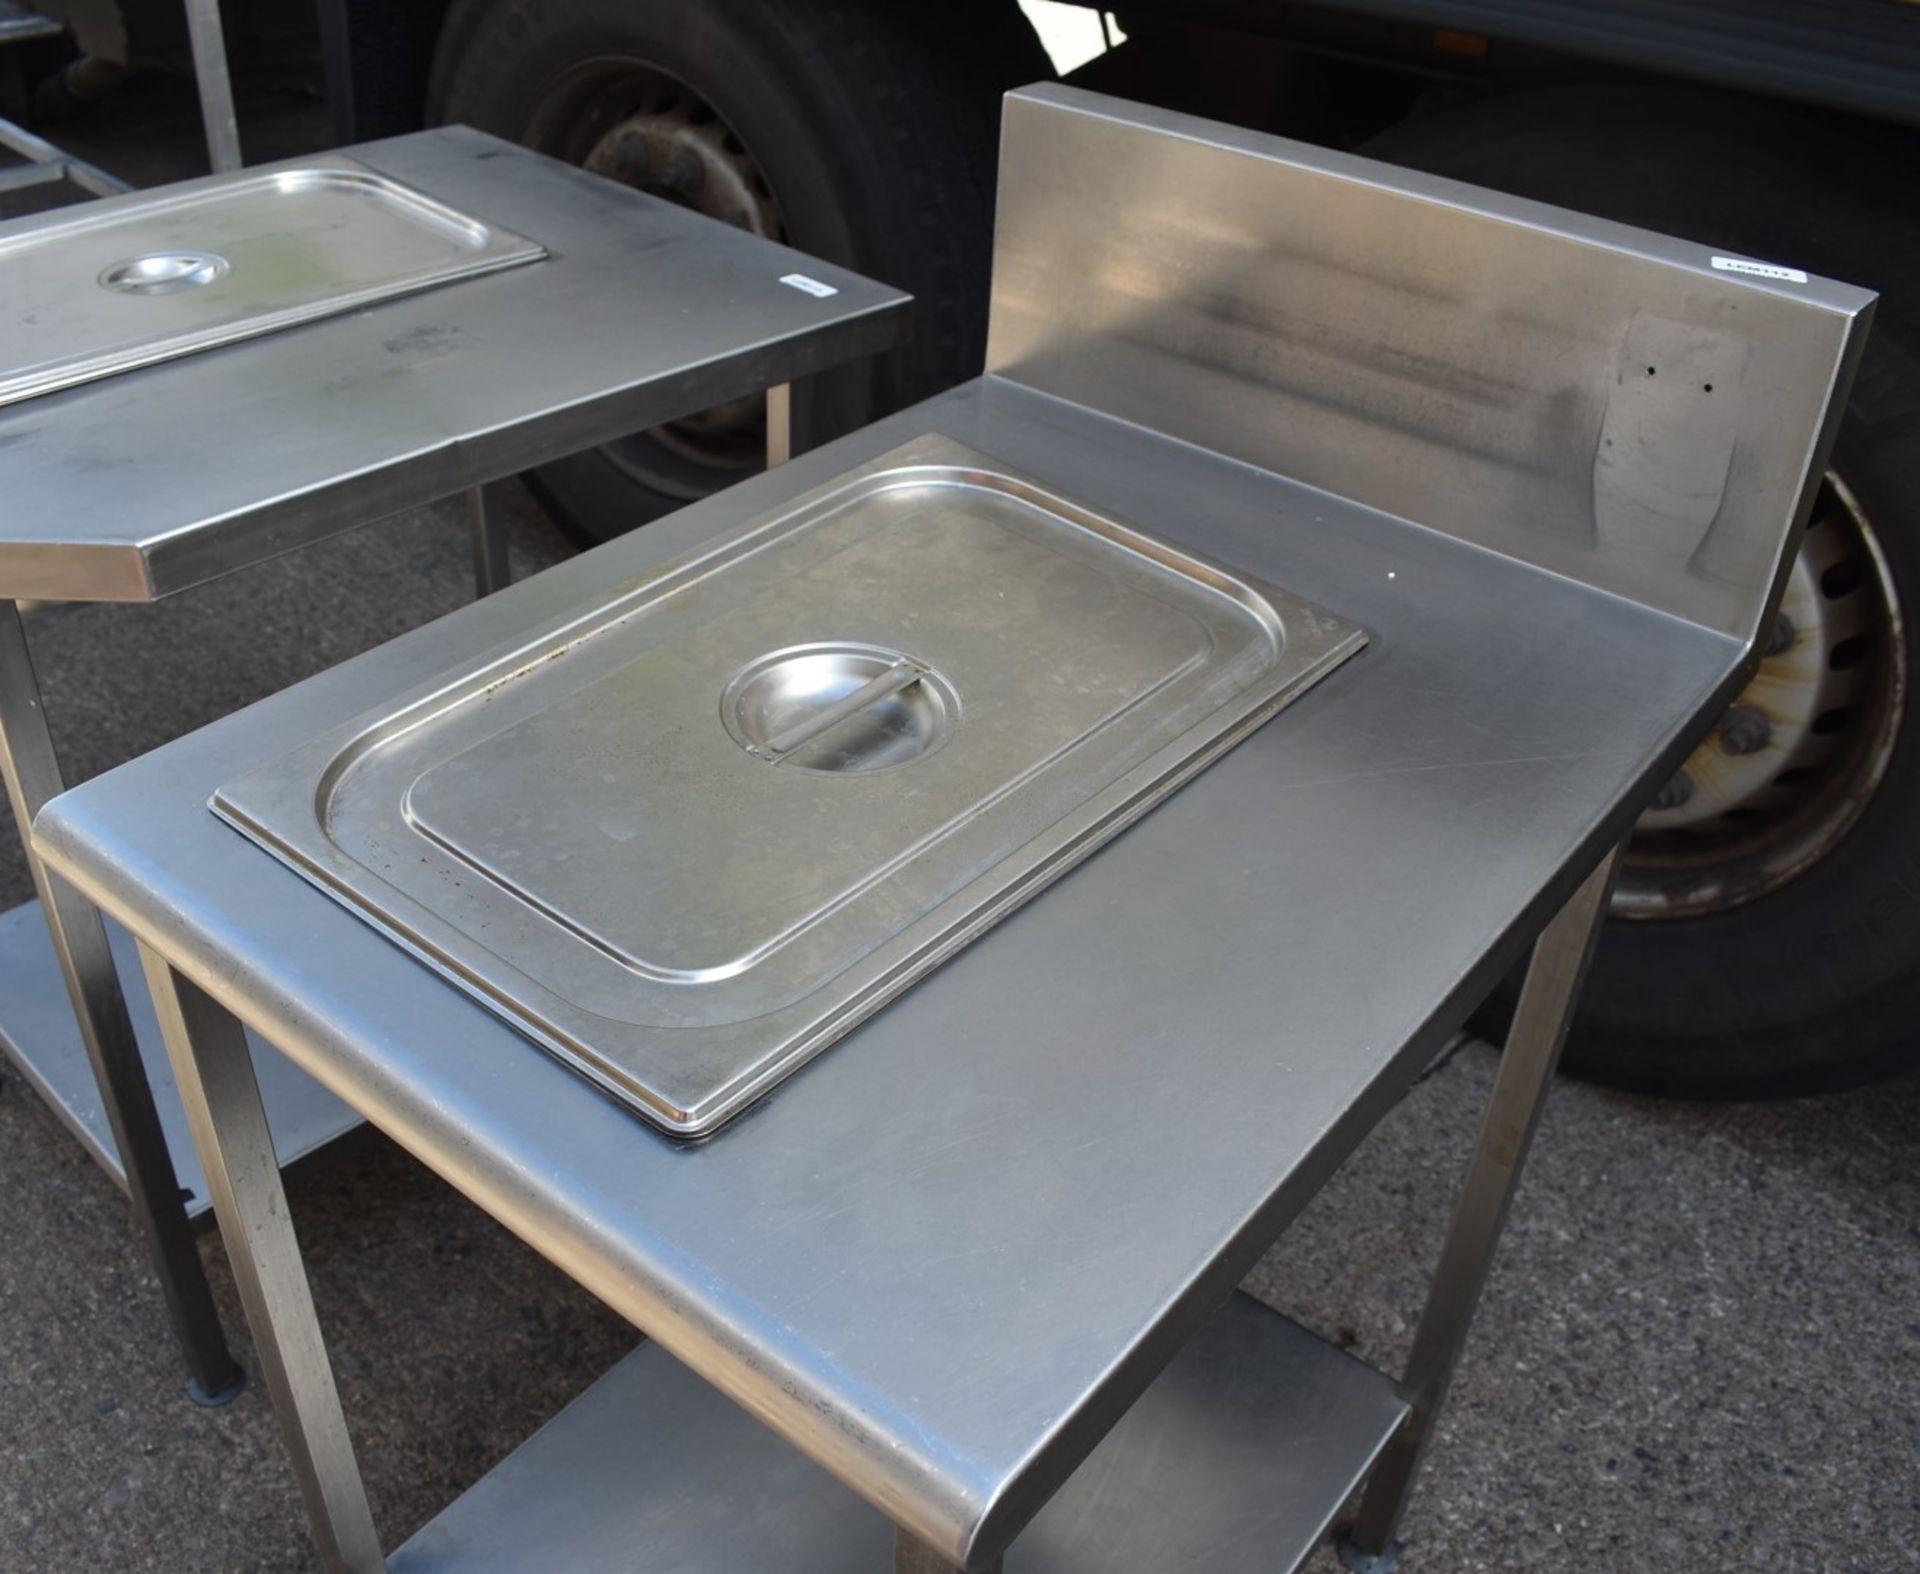 1 x Stainless Steel Prep Table WIth Inset Gastro Pan, Upstand, Undershelf and Gastro Pan Lid - - Image 2 of 5